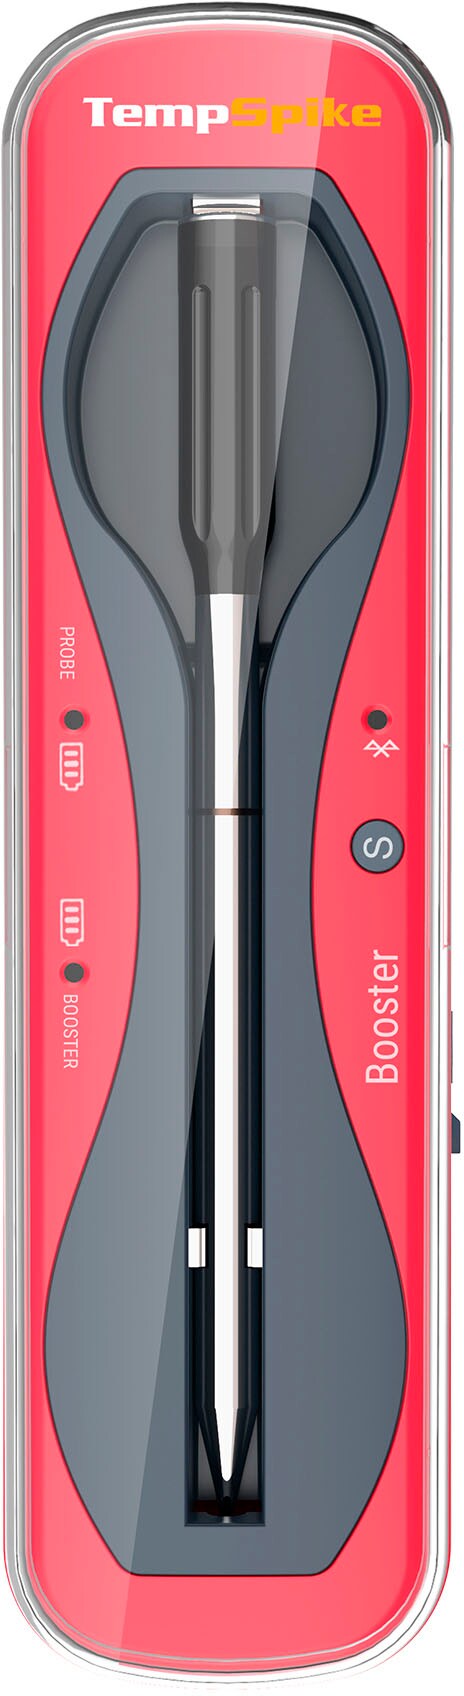 ThermoPro - TempSpike Bluetooth Food Thermometer - Red/Black_1